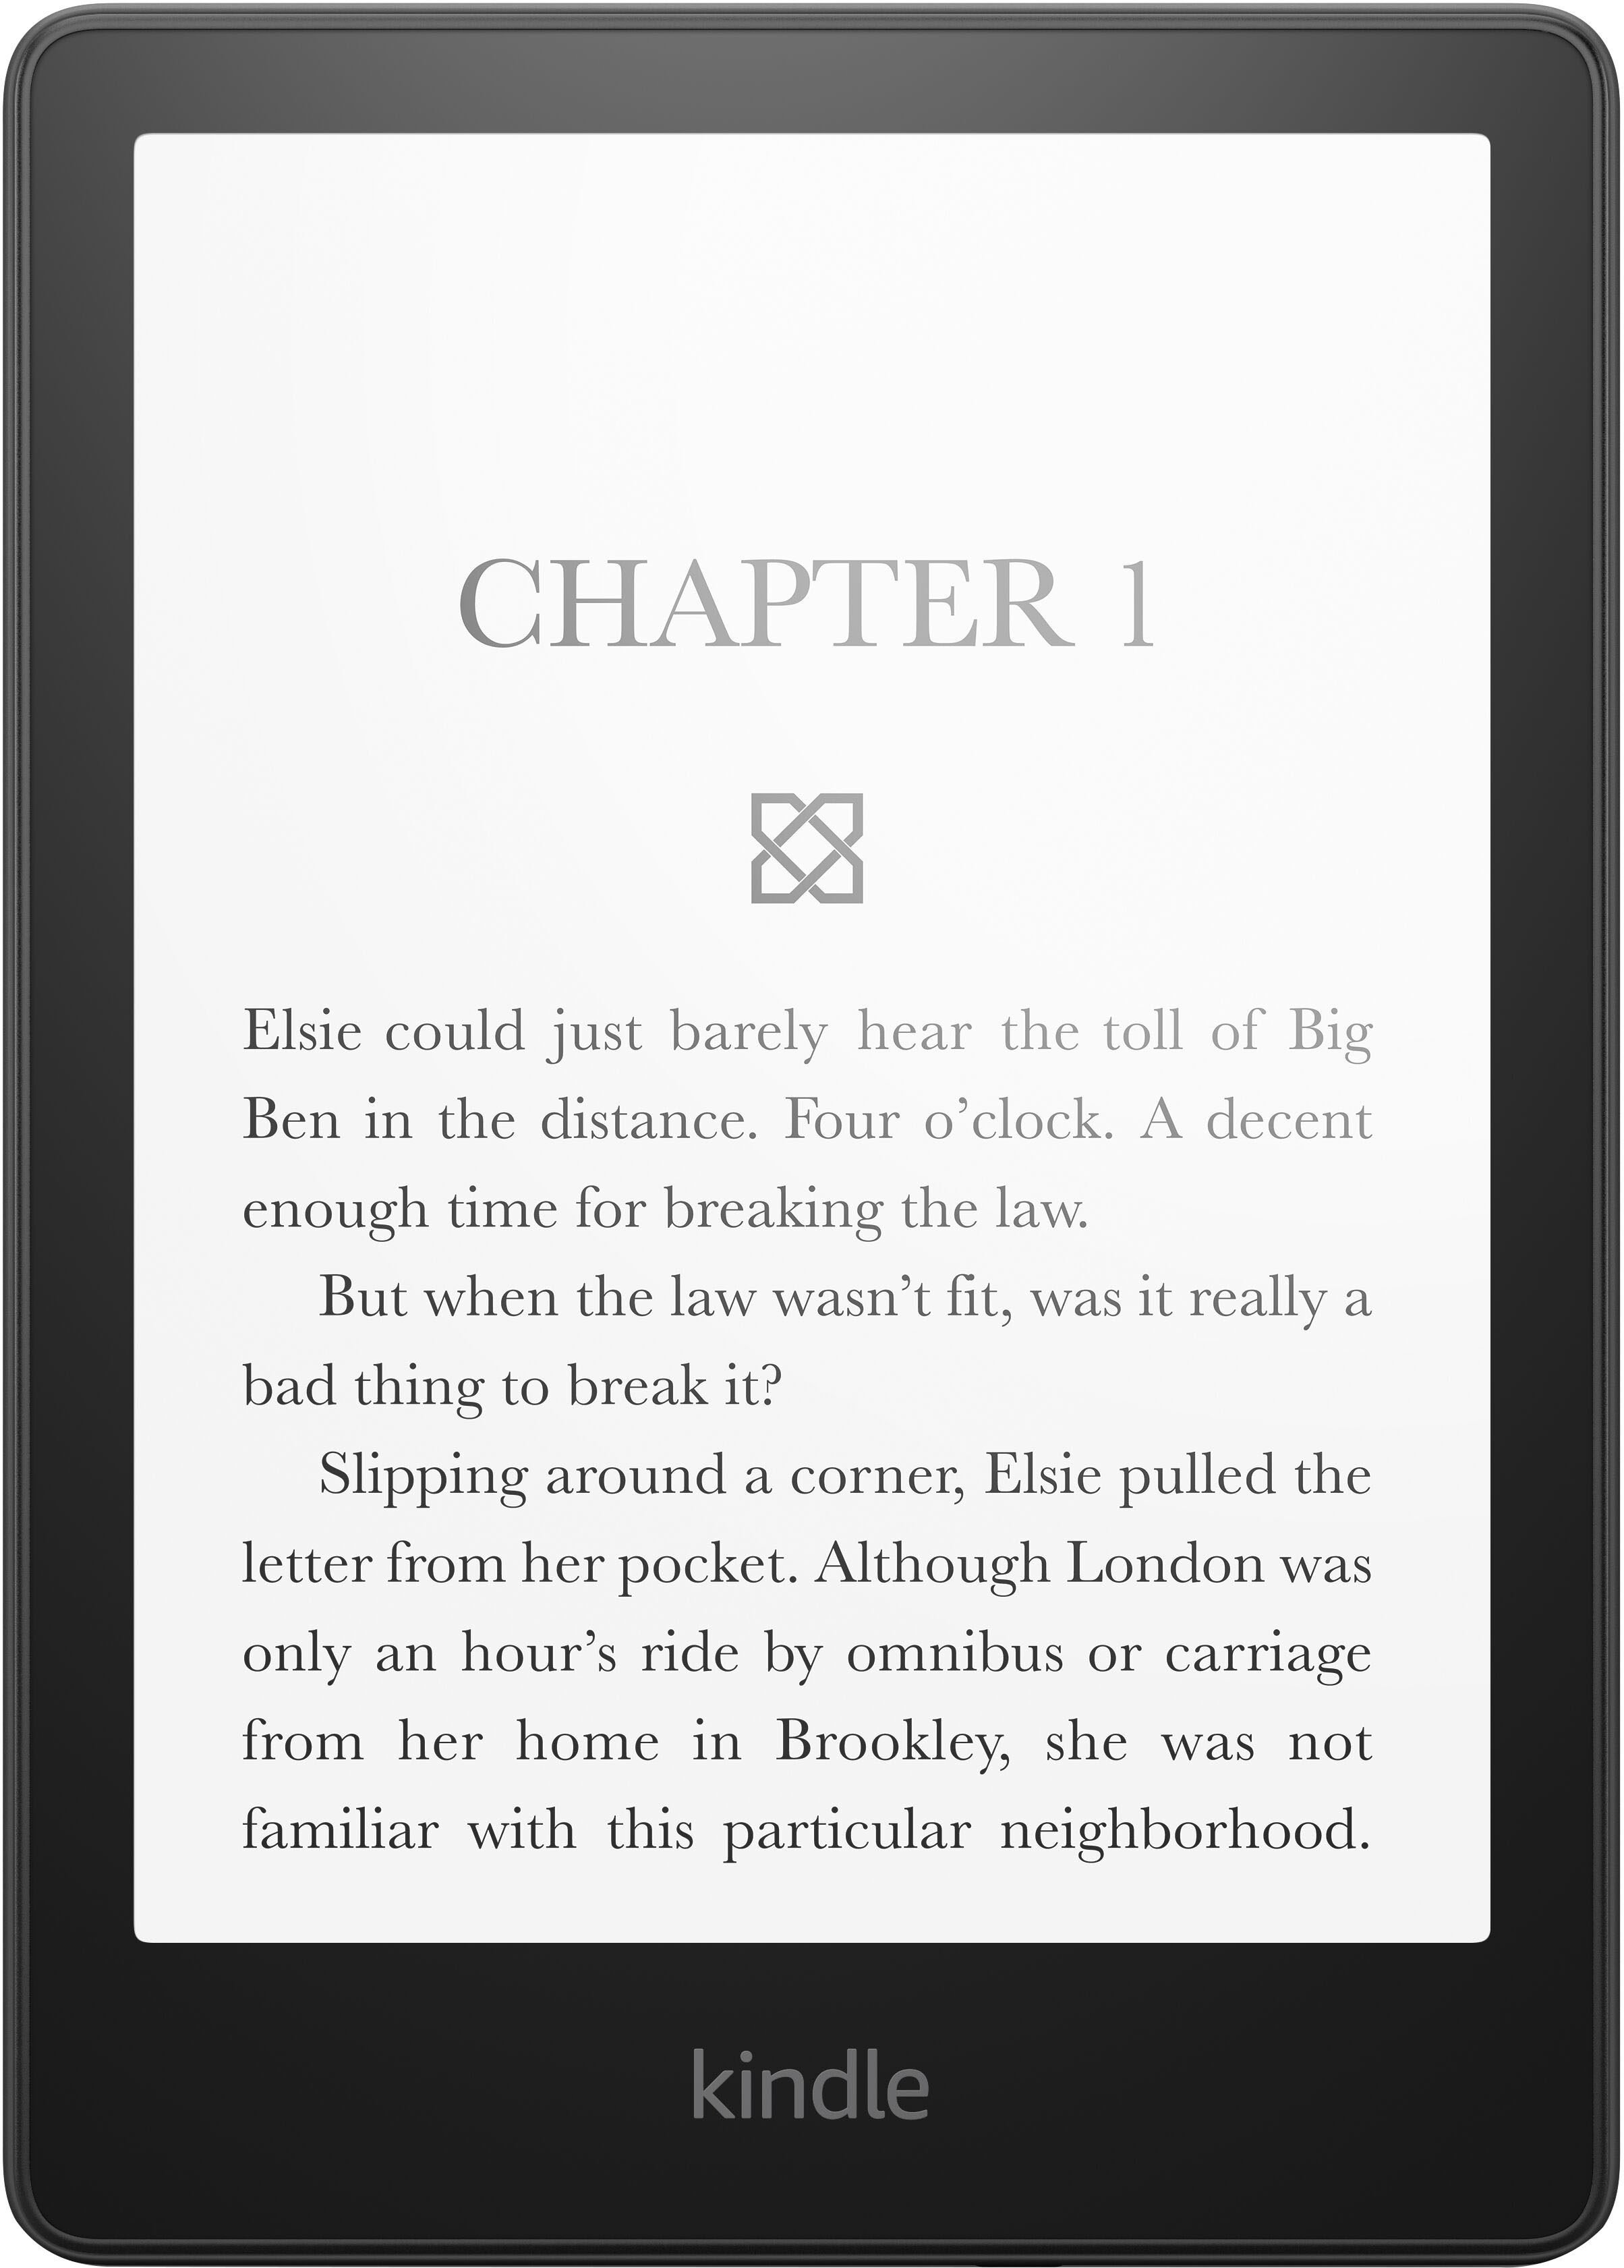 Amazon - Kindle Paperwhite 8 GB - Now with a 6.8